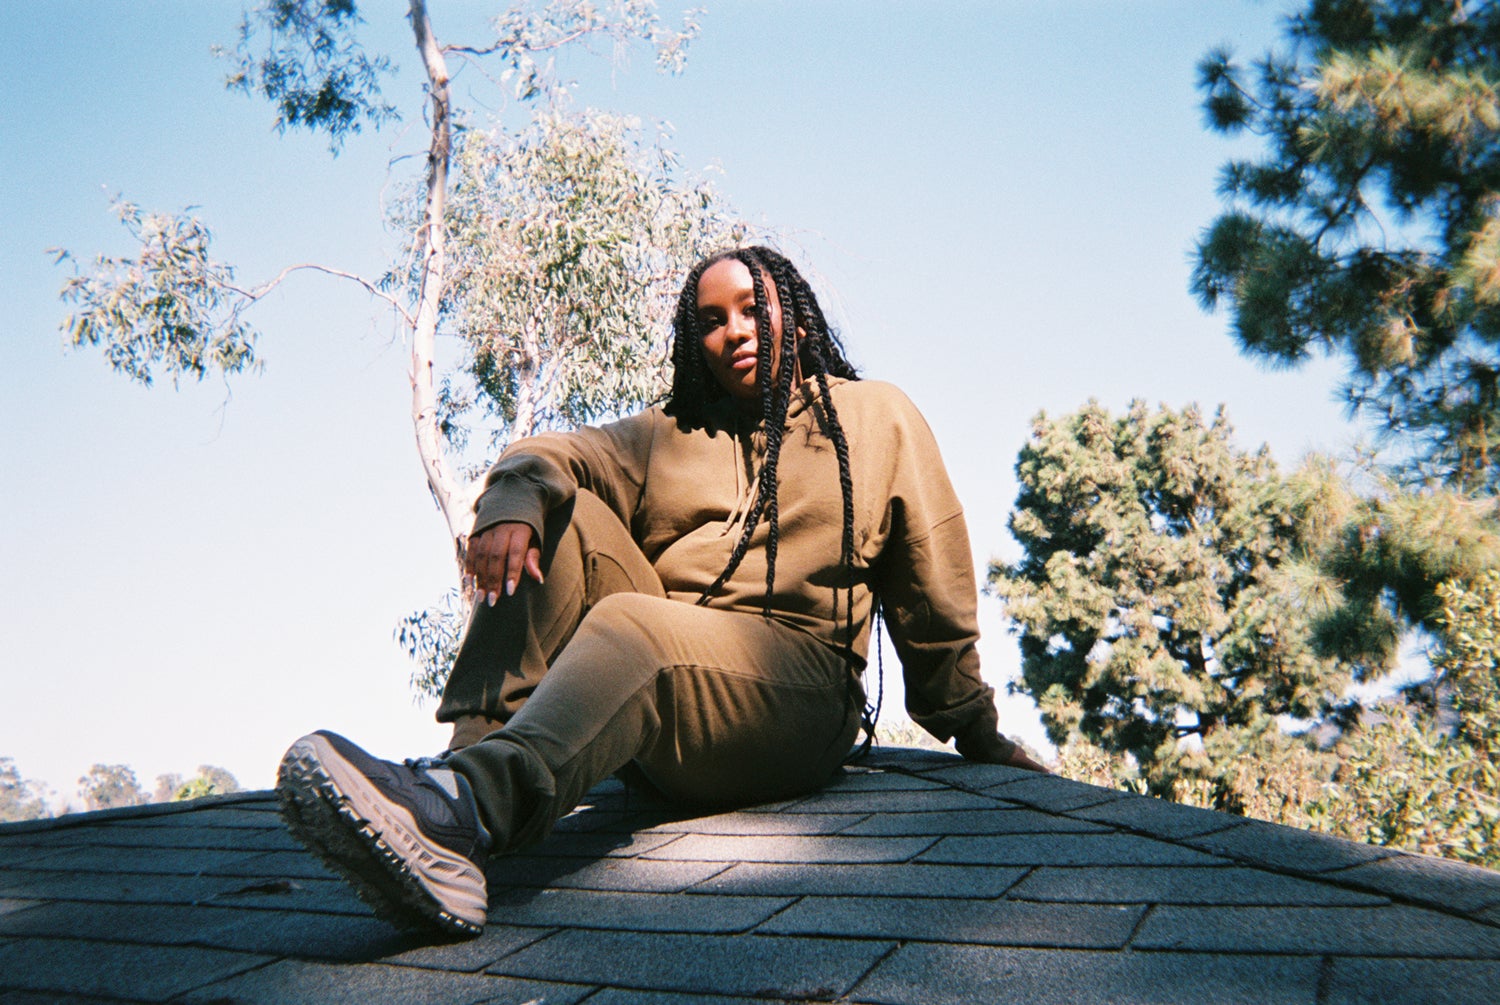 UGG Taps Zuri Marley For Ready-To-Wear Self Shot Campaign